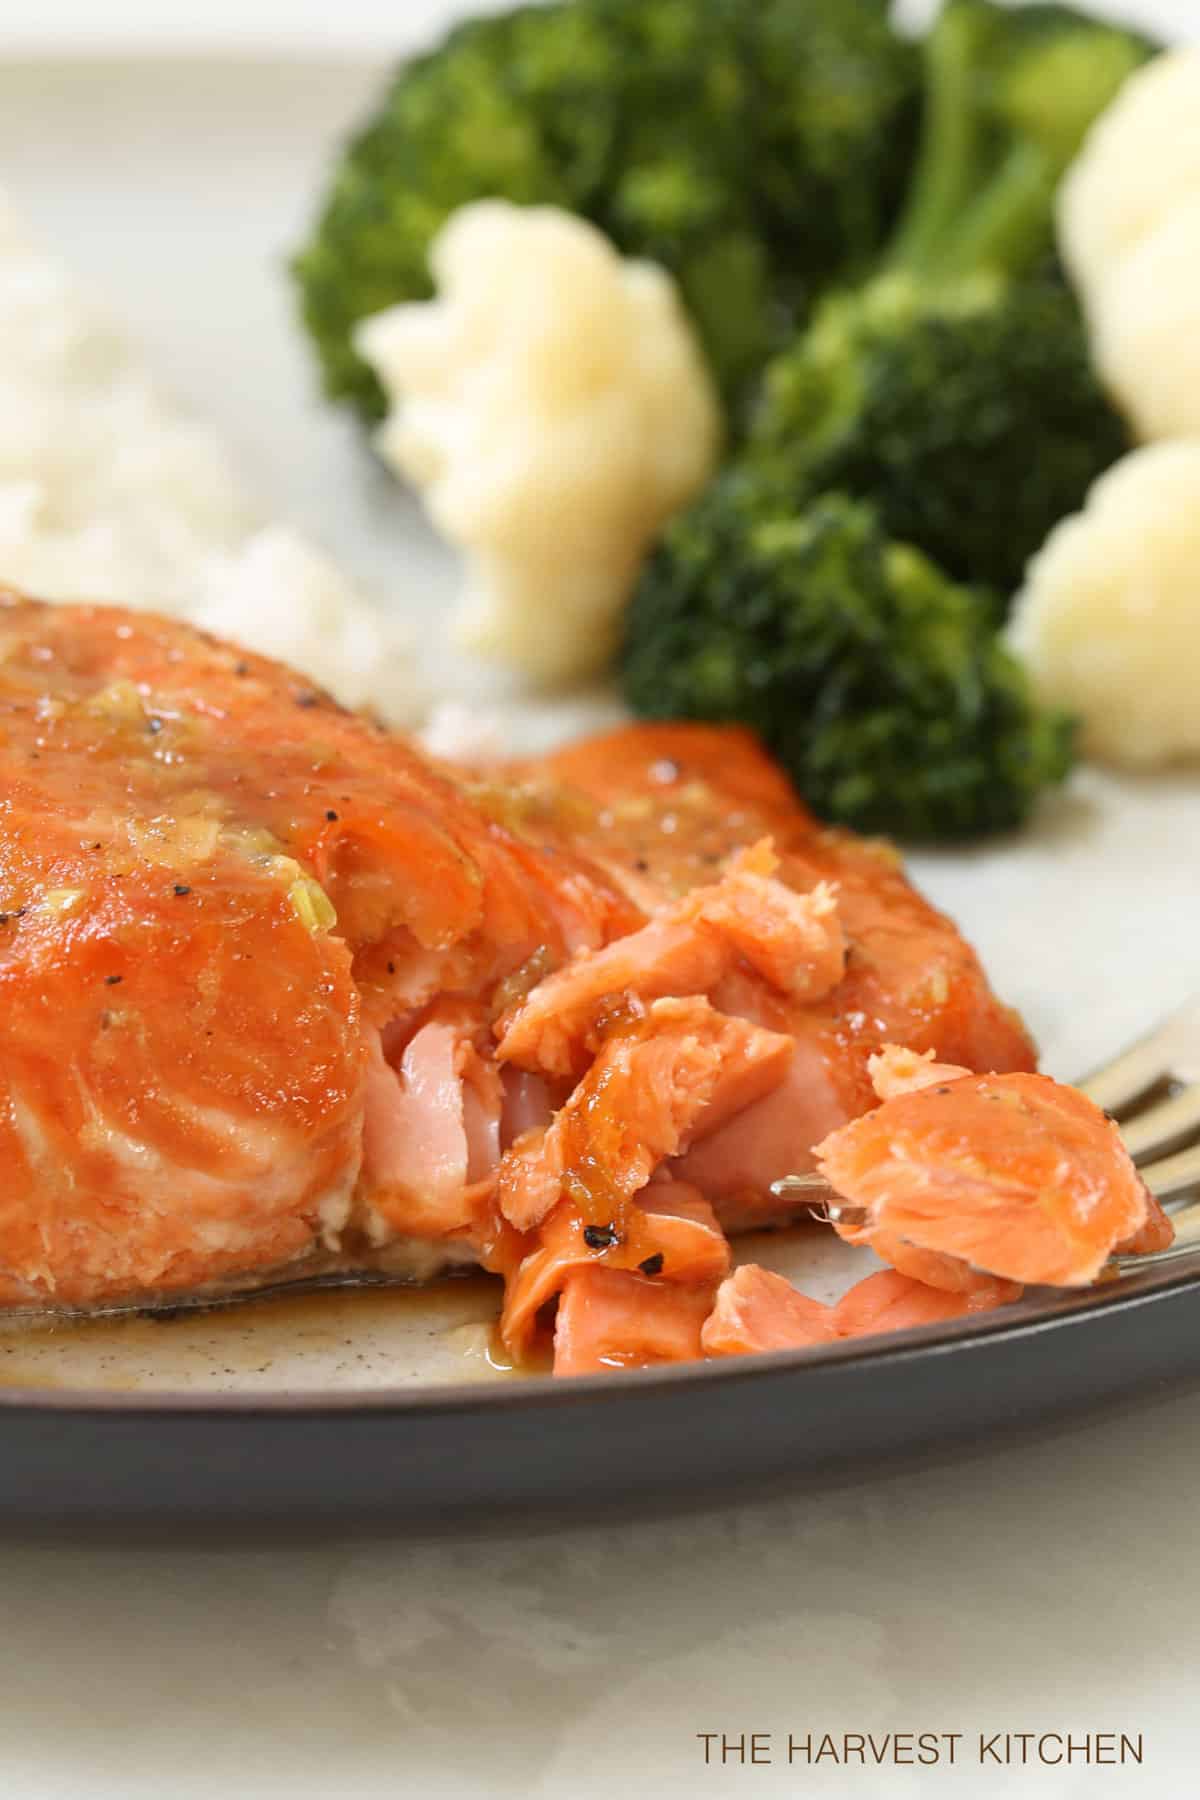 This Orange Teriyaki Glazed Salmon is marinated in a simple soy and citrus marinade with hints of garlic and ginger